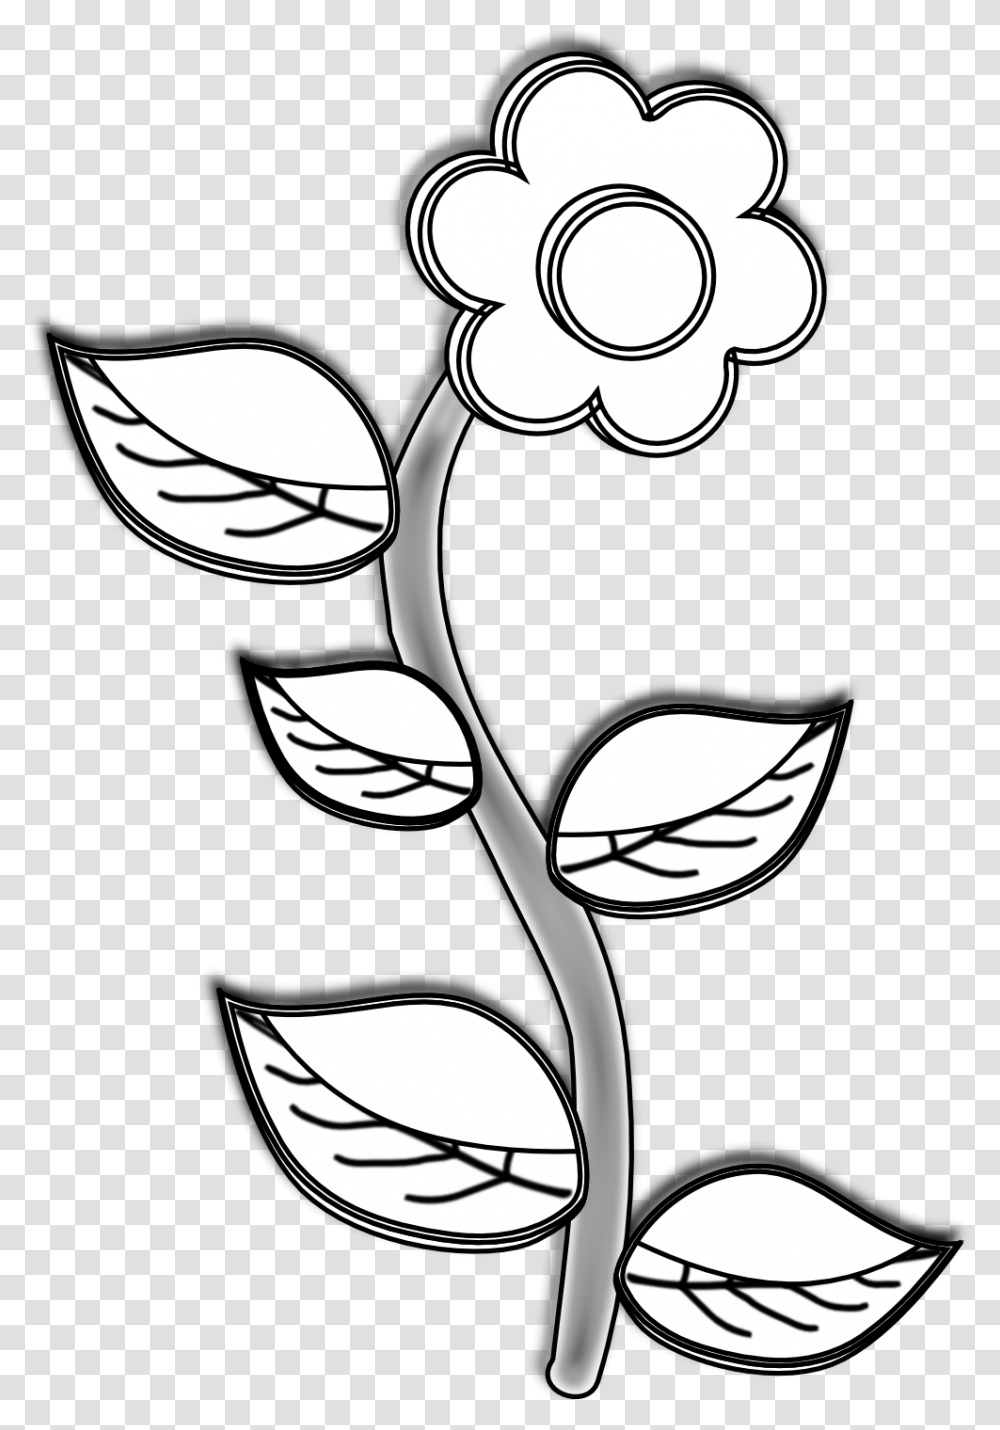 Image Result For Simple Fall Drawings Activitieschloe, Plant, Flower, Blossom, Floral Design Transparent Png